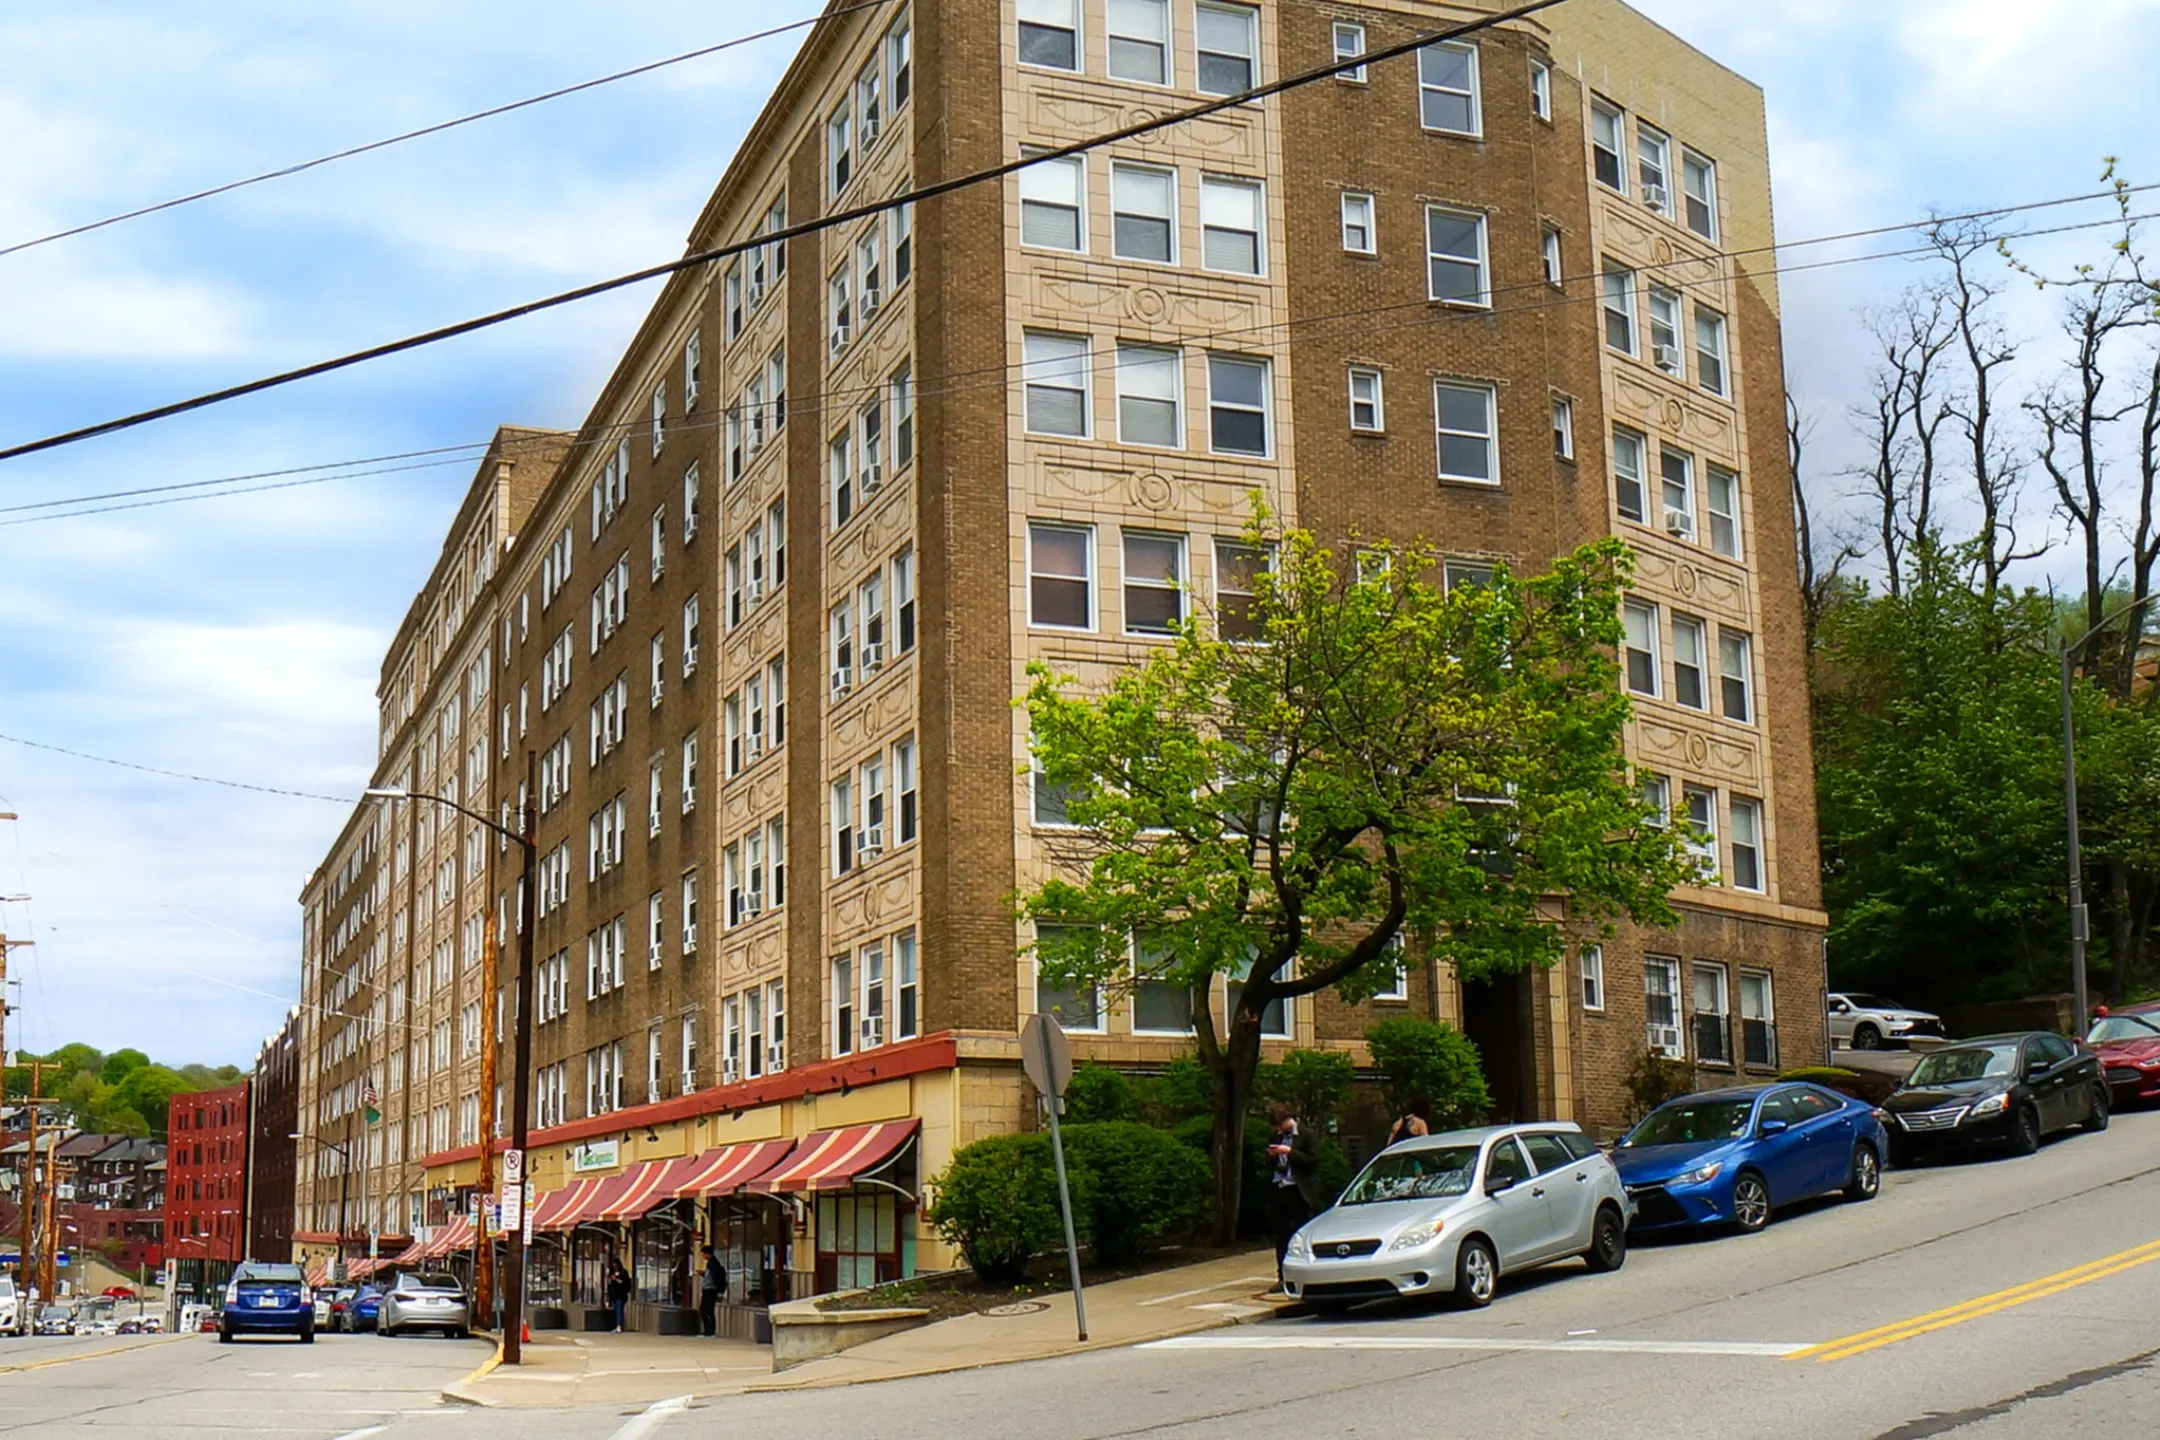 Building - Morrowfield Apartments - Pittsburgh, PA